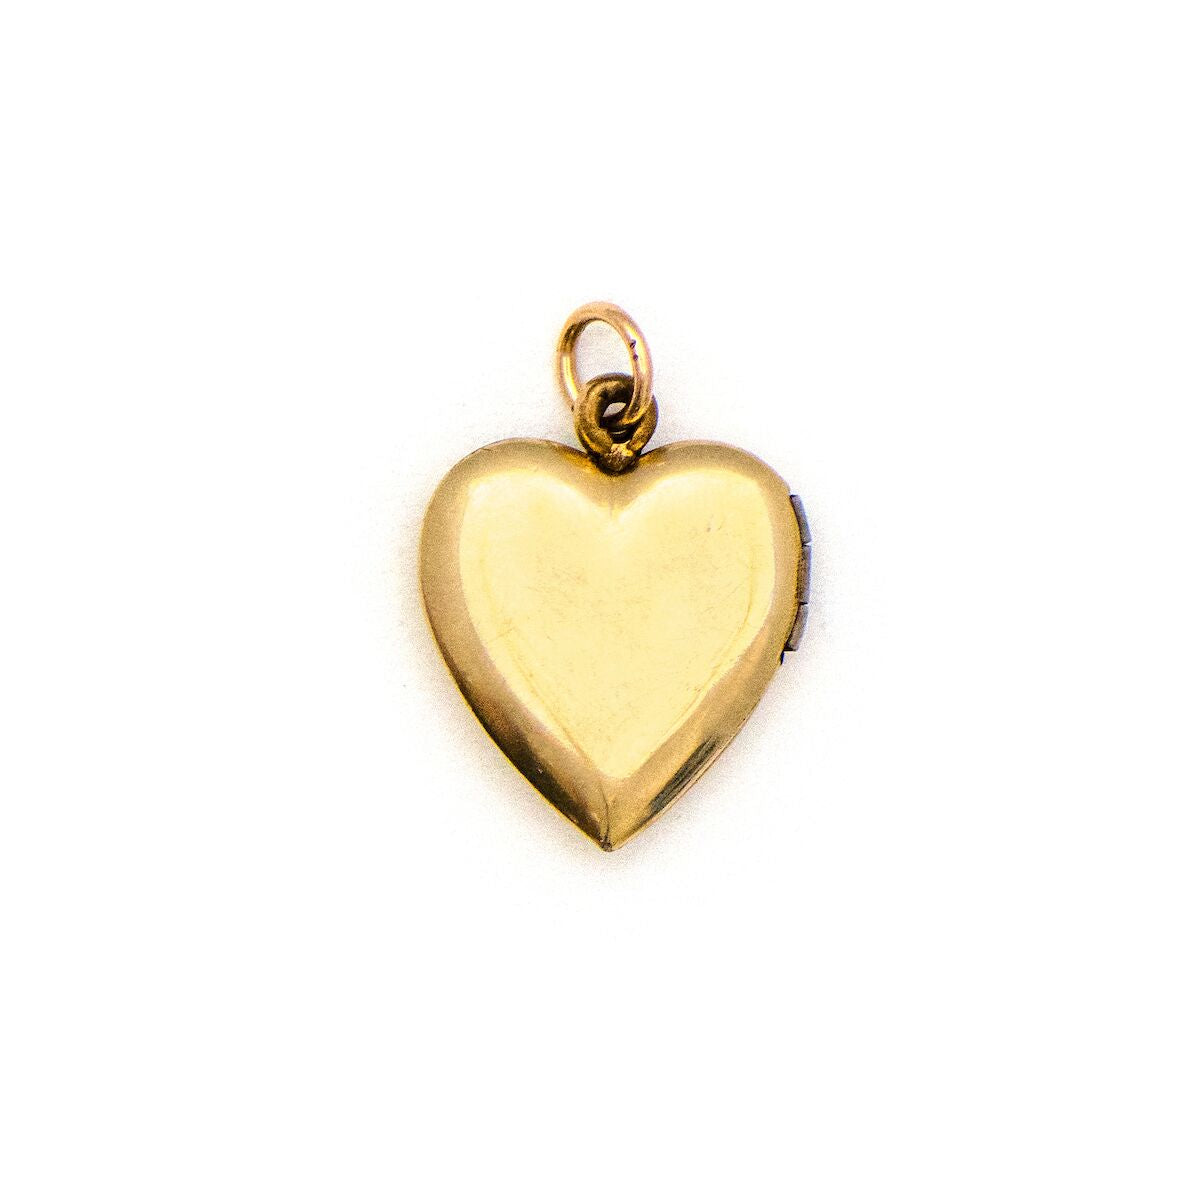 Brass Stamping, Floral Heart Pendant, 07250, Brass Ox, Brass Stamping,  Pendant, Heart, Floral Design, Victorian, 32mm, Heart Charm, US Made,  Nickel